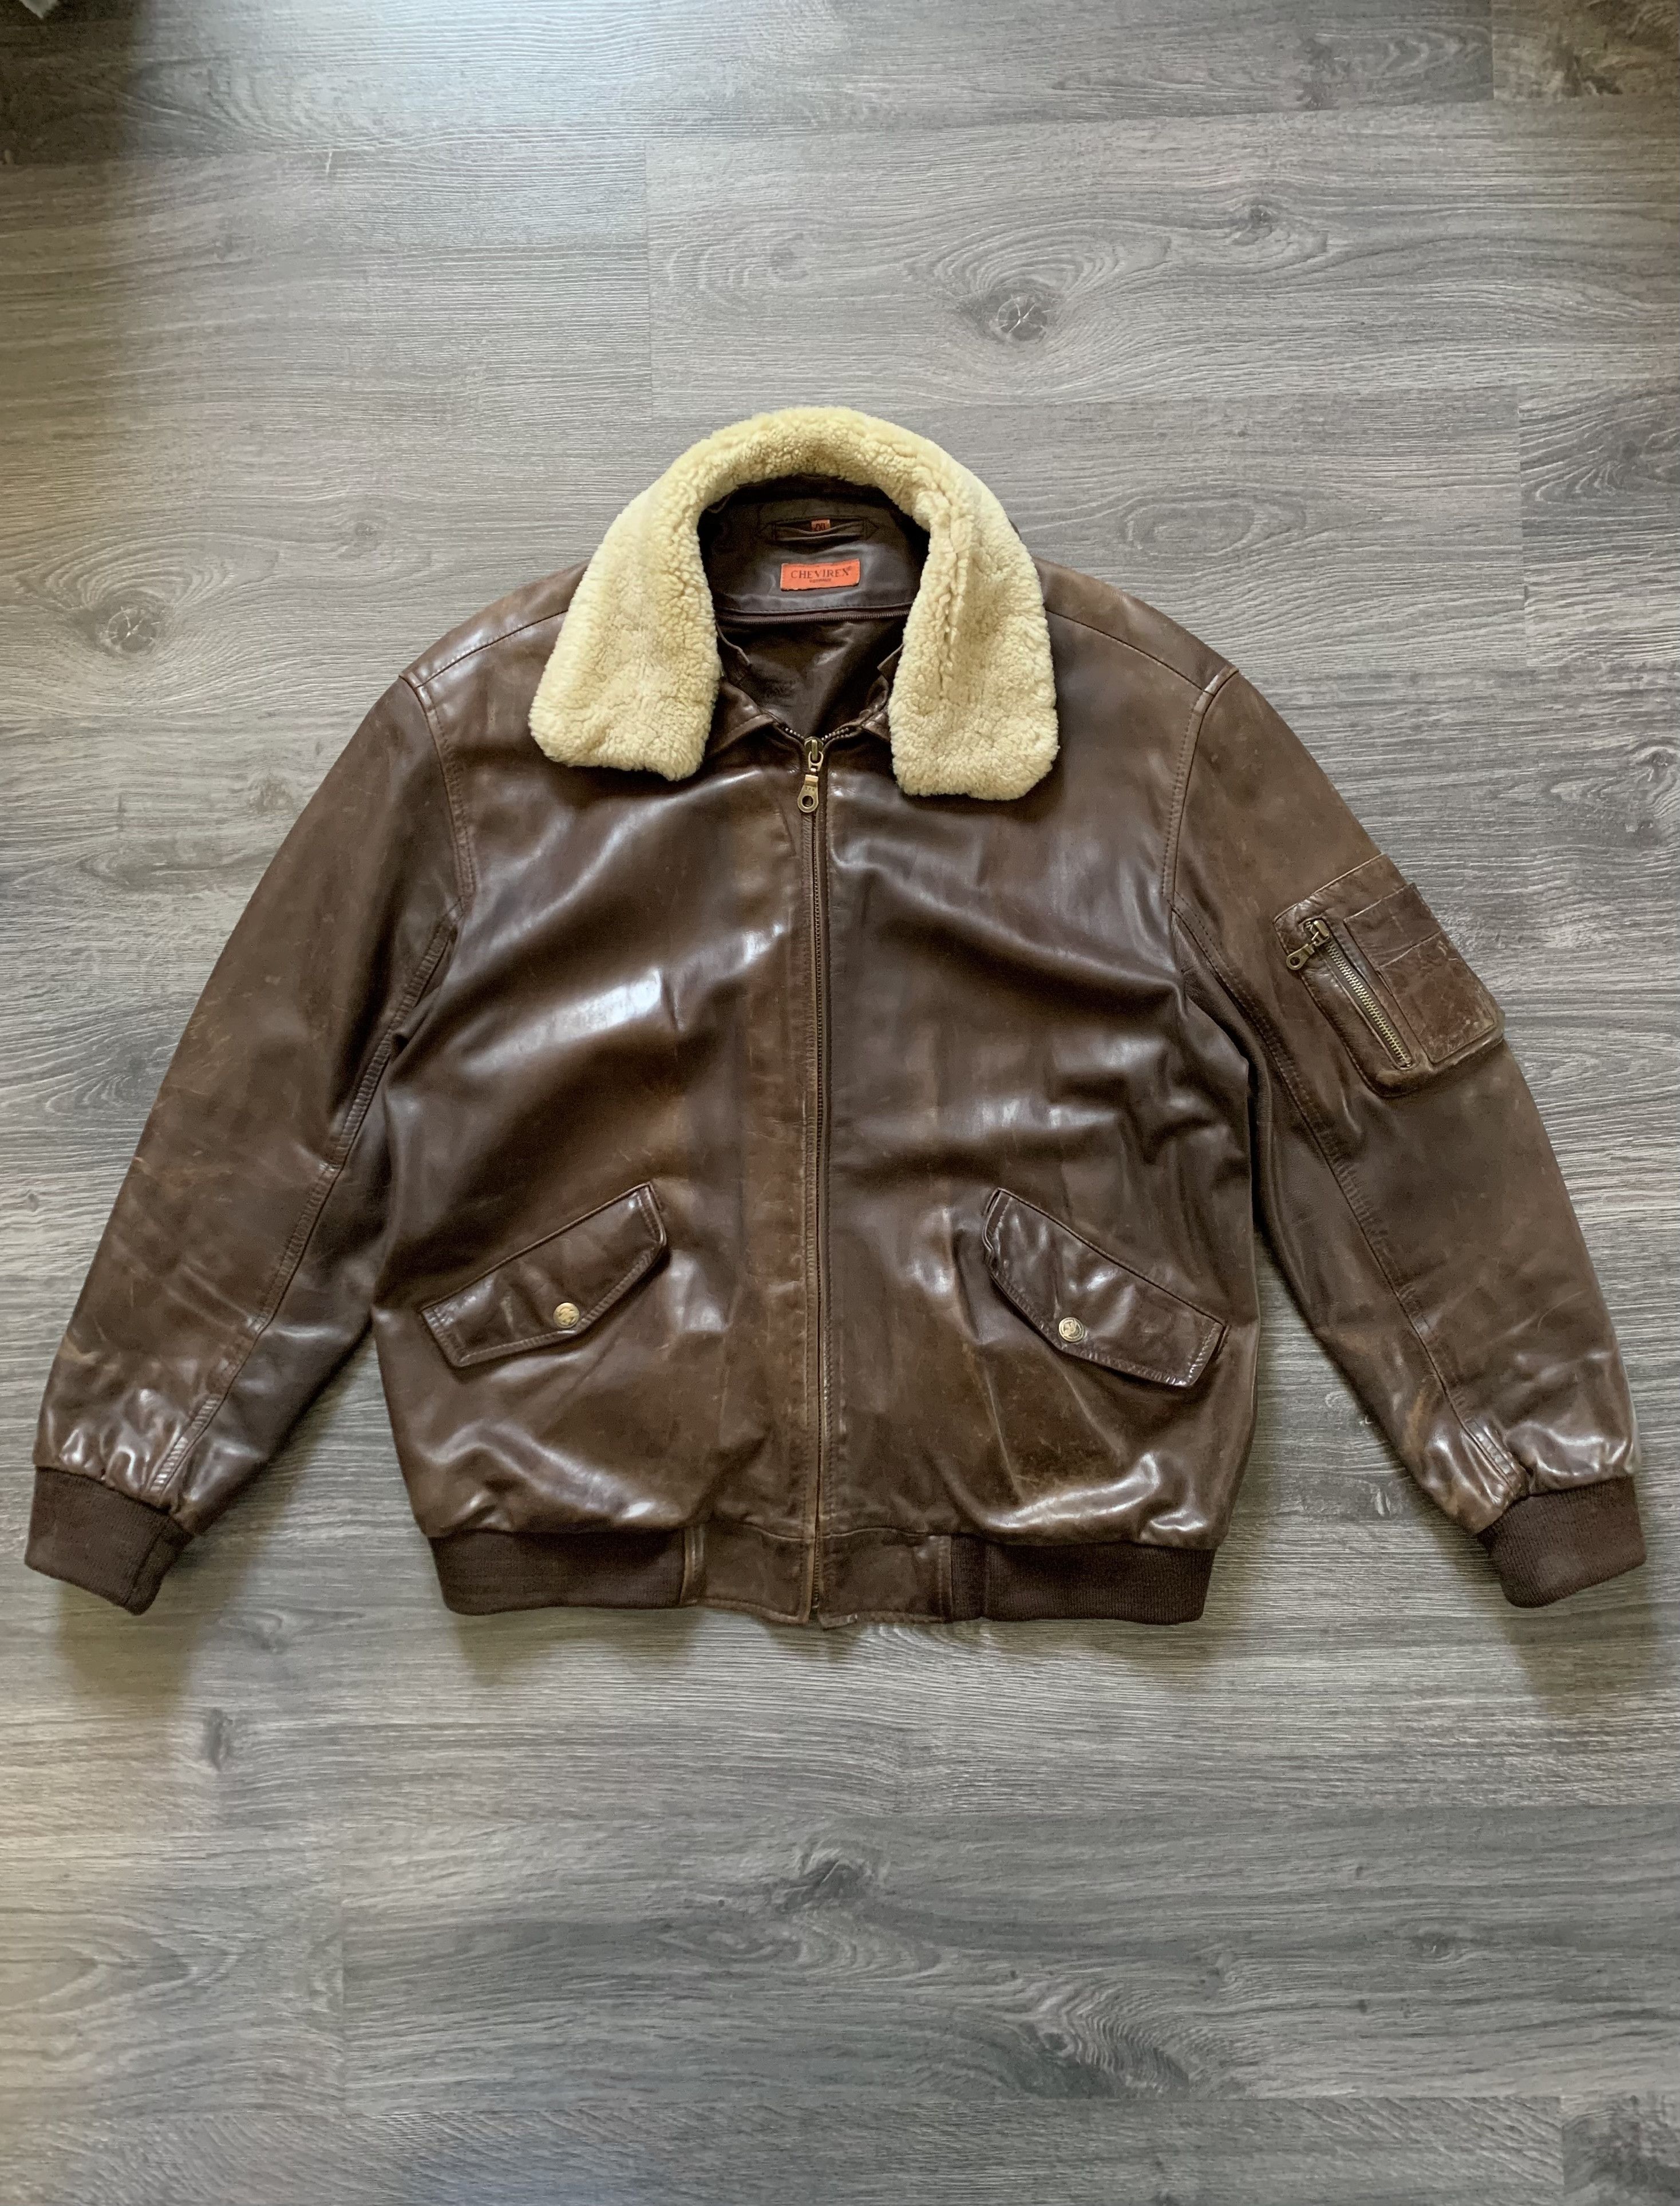 Pre-owned Genuine Leather X Leather Jacket Vintage Chevirex Aviator Pilot Leather Bomber Jacket Brown (size 2xl)